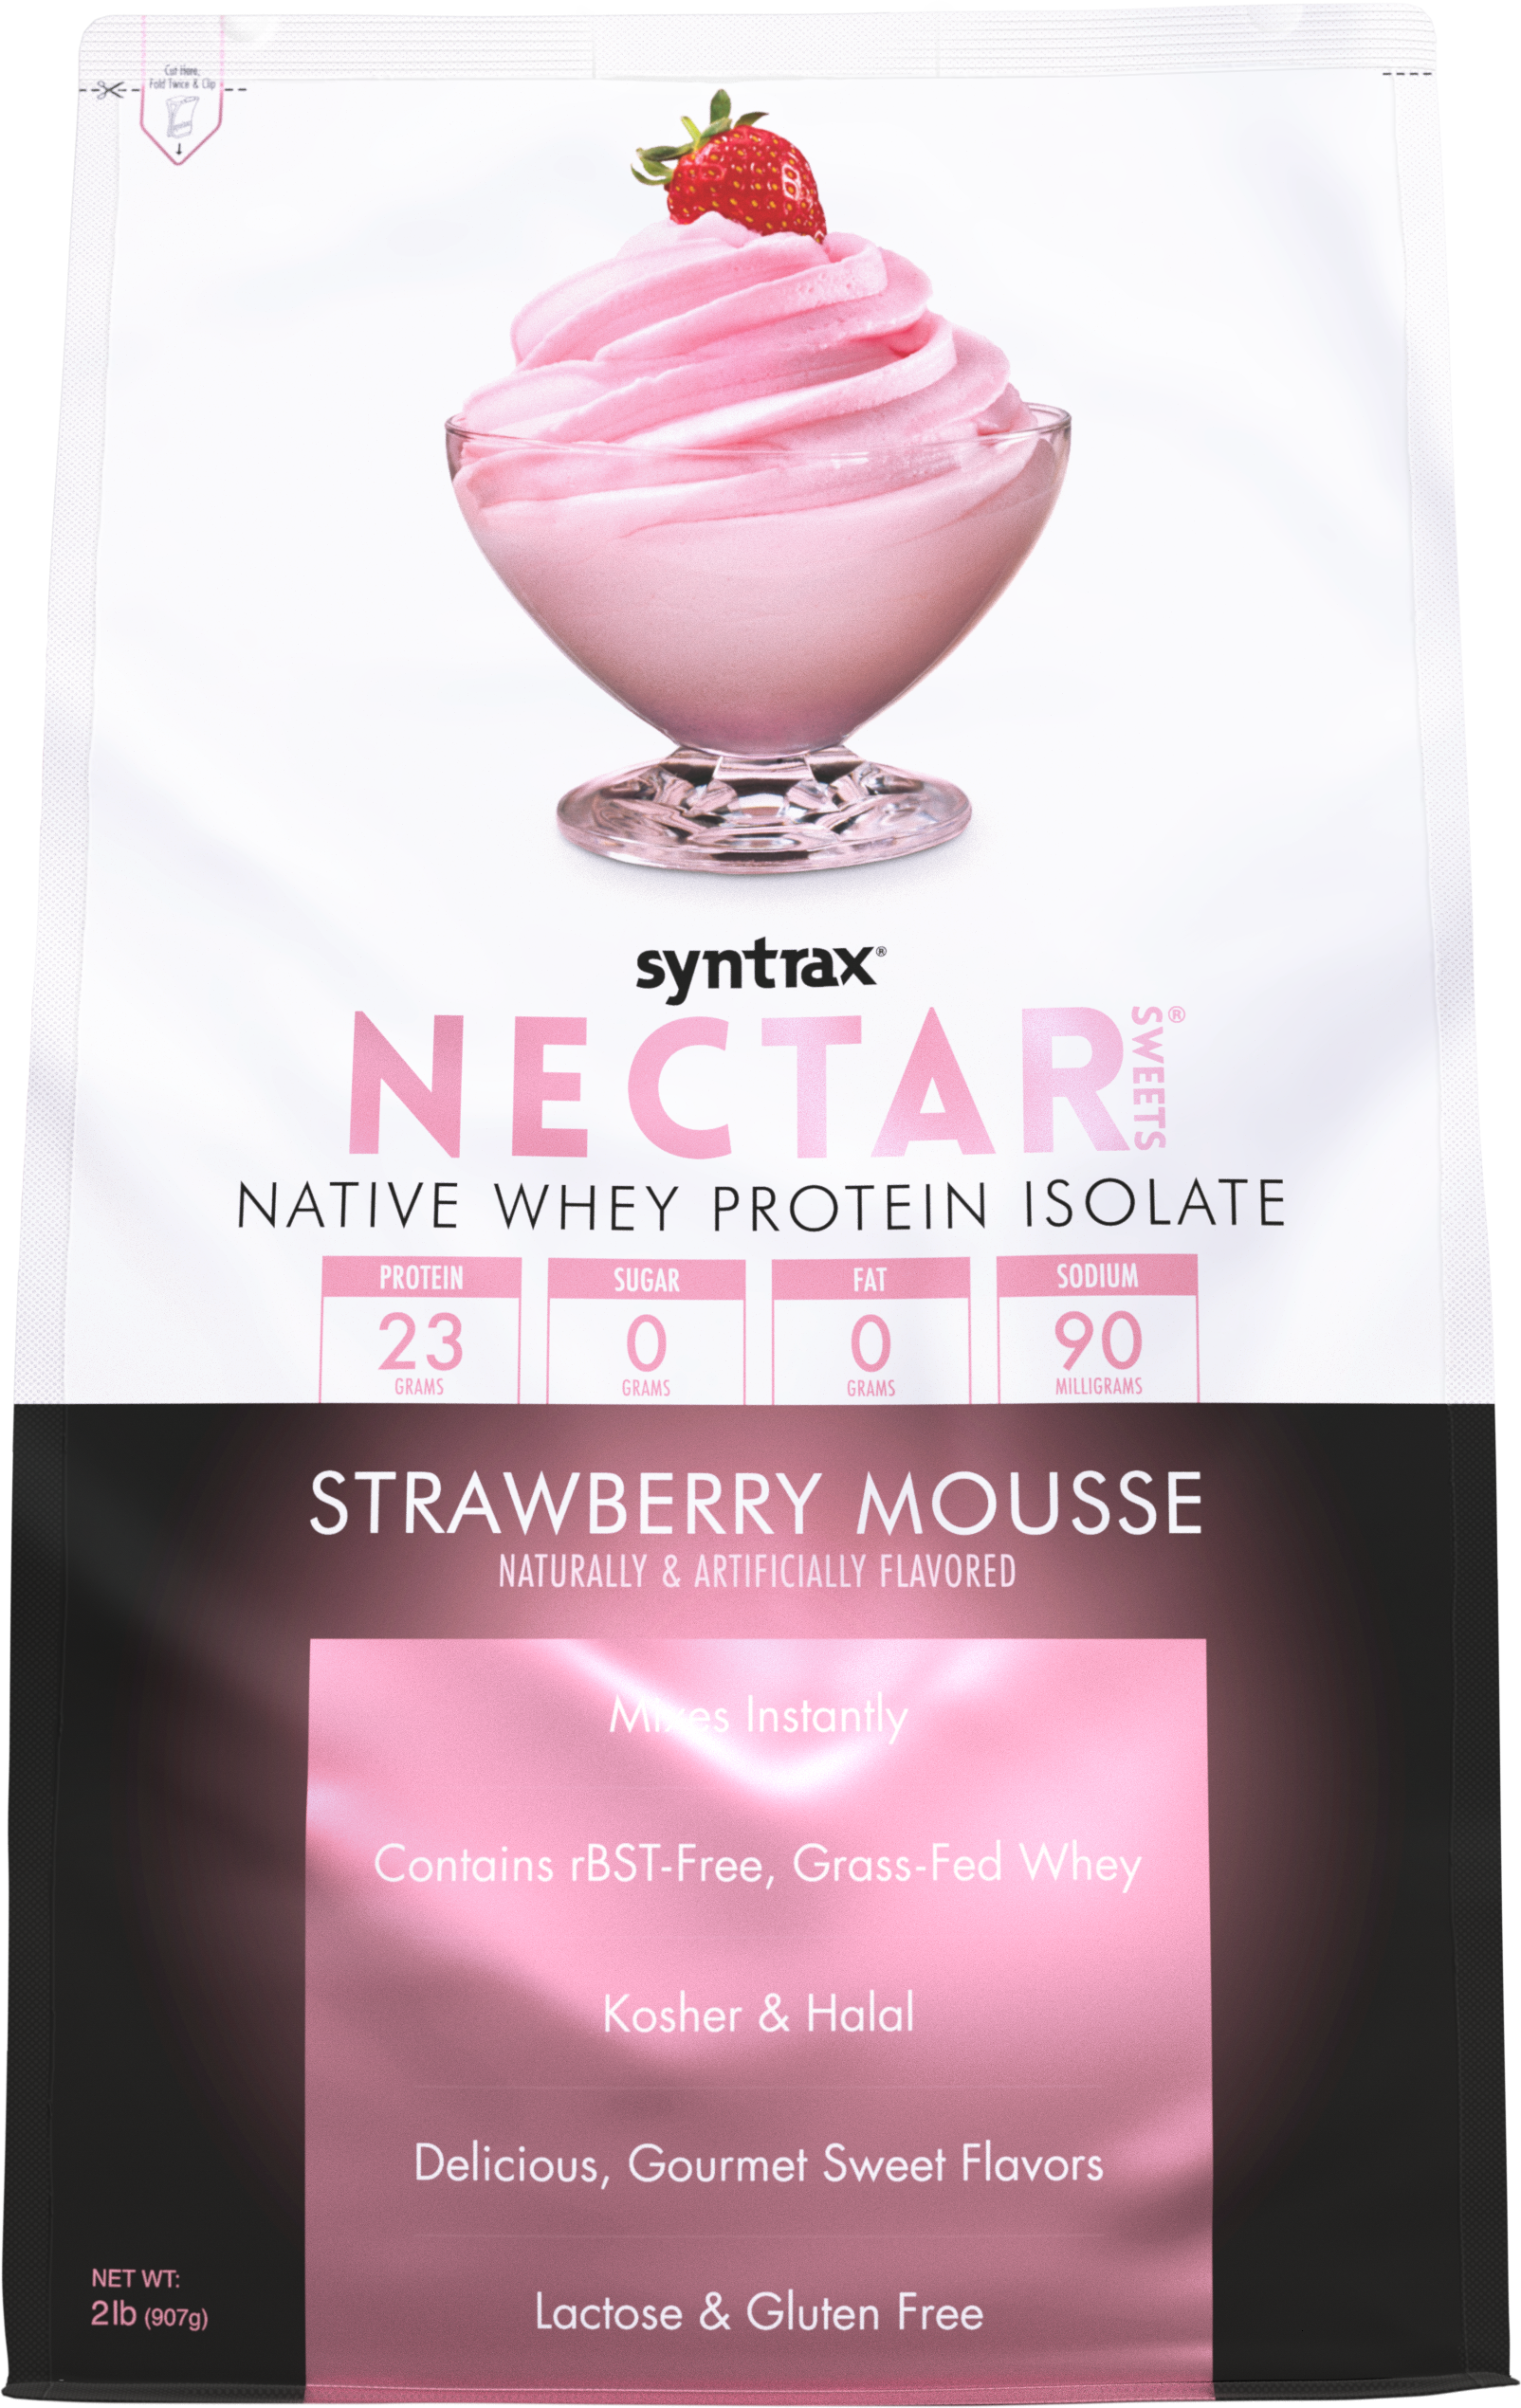 Syntrax Nectar Sweets 2lb Protein Powder - Strawberry Mousse